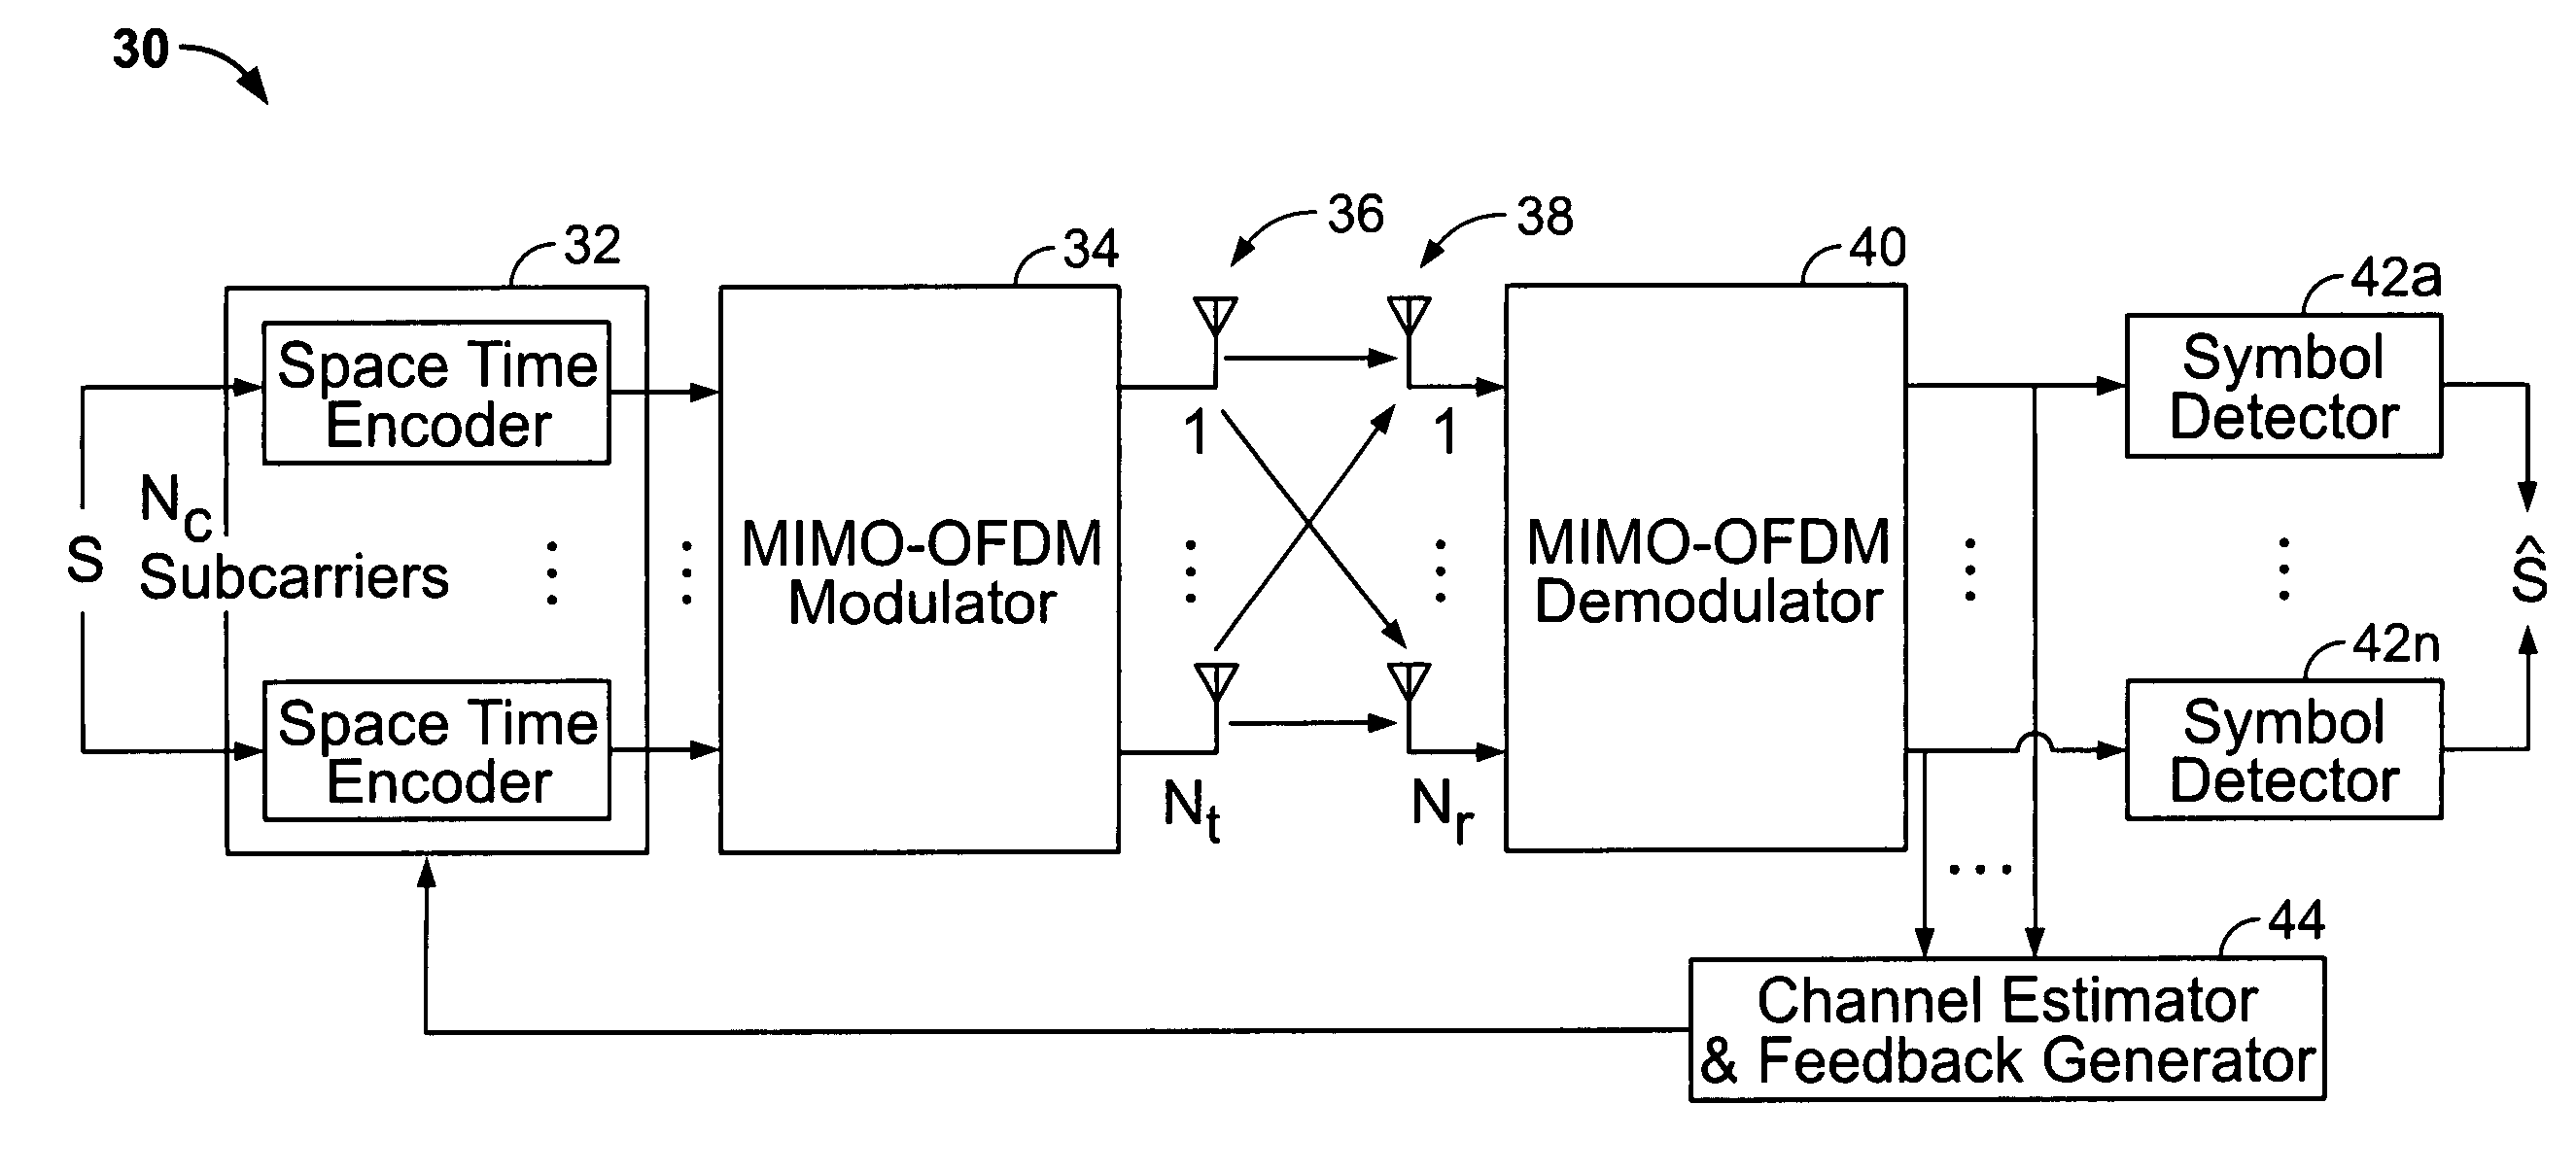 Trellis-based feedback reduction for multiple input multiple output orthogonal frequency division multiplexing (MIMO-OFDM) with rate-limited feedback